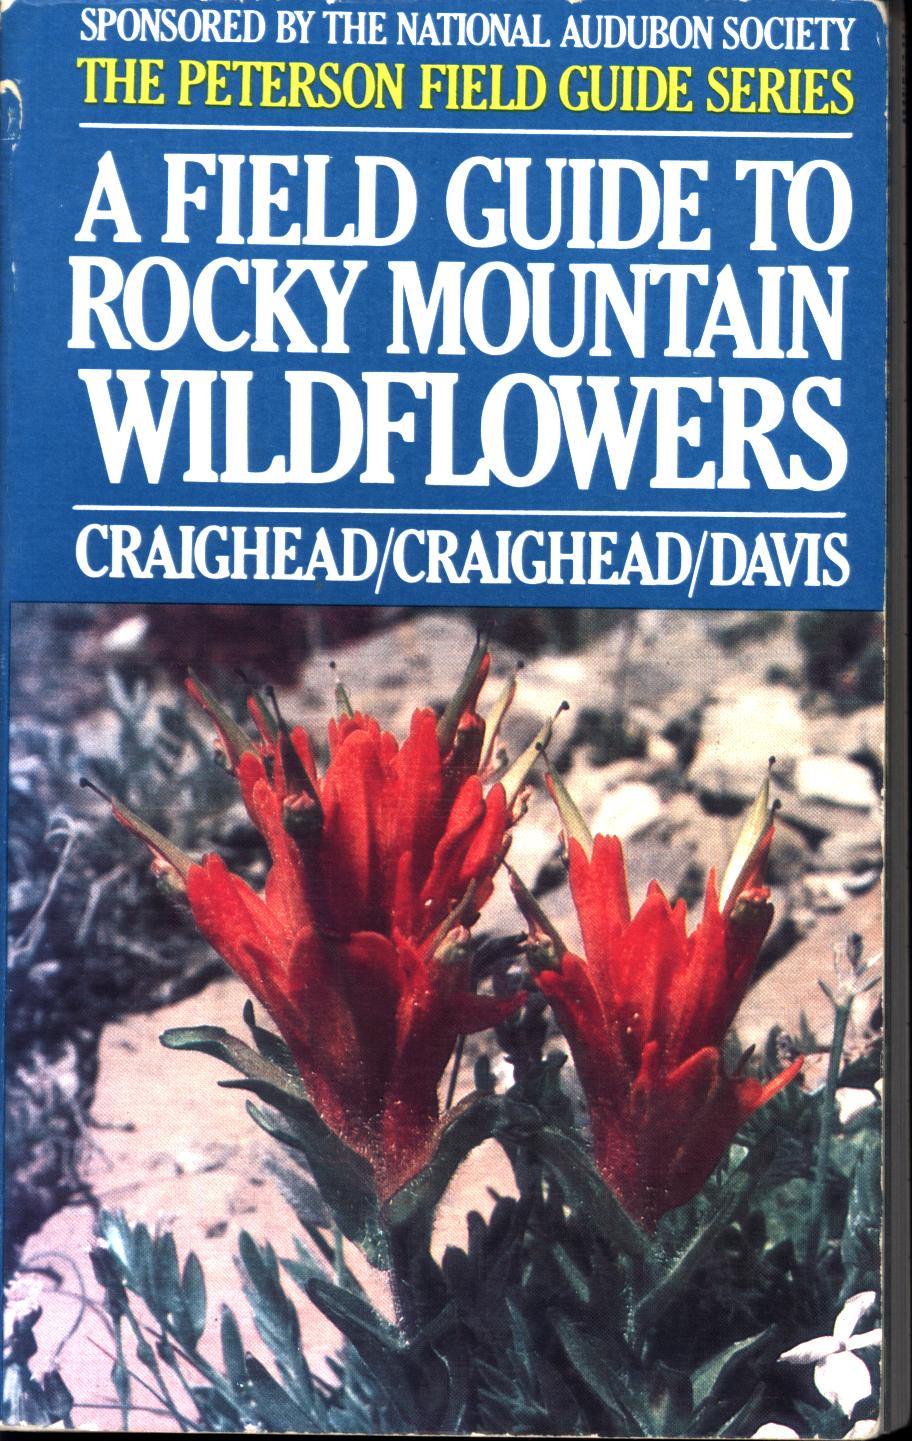 A FIELD GUIDE TO ROCKY MOUNTAIN WILDFLOWERS: from northern Arizona and New Mexico to British Columbia.